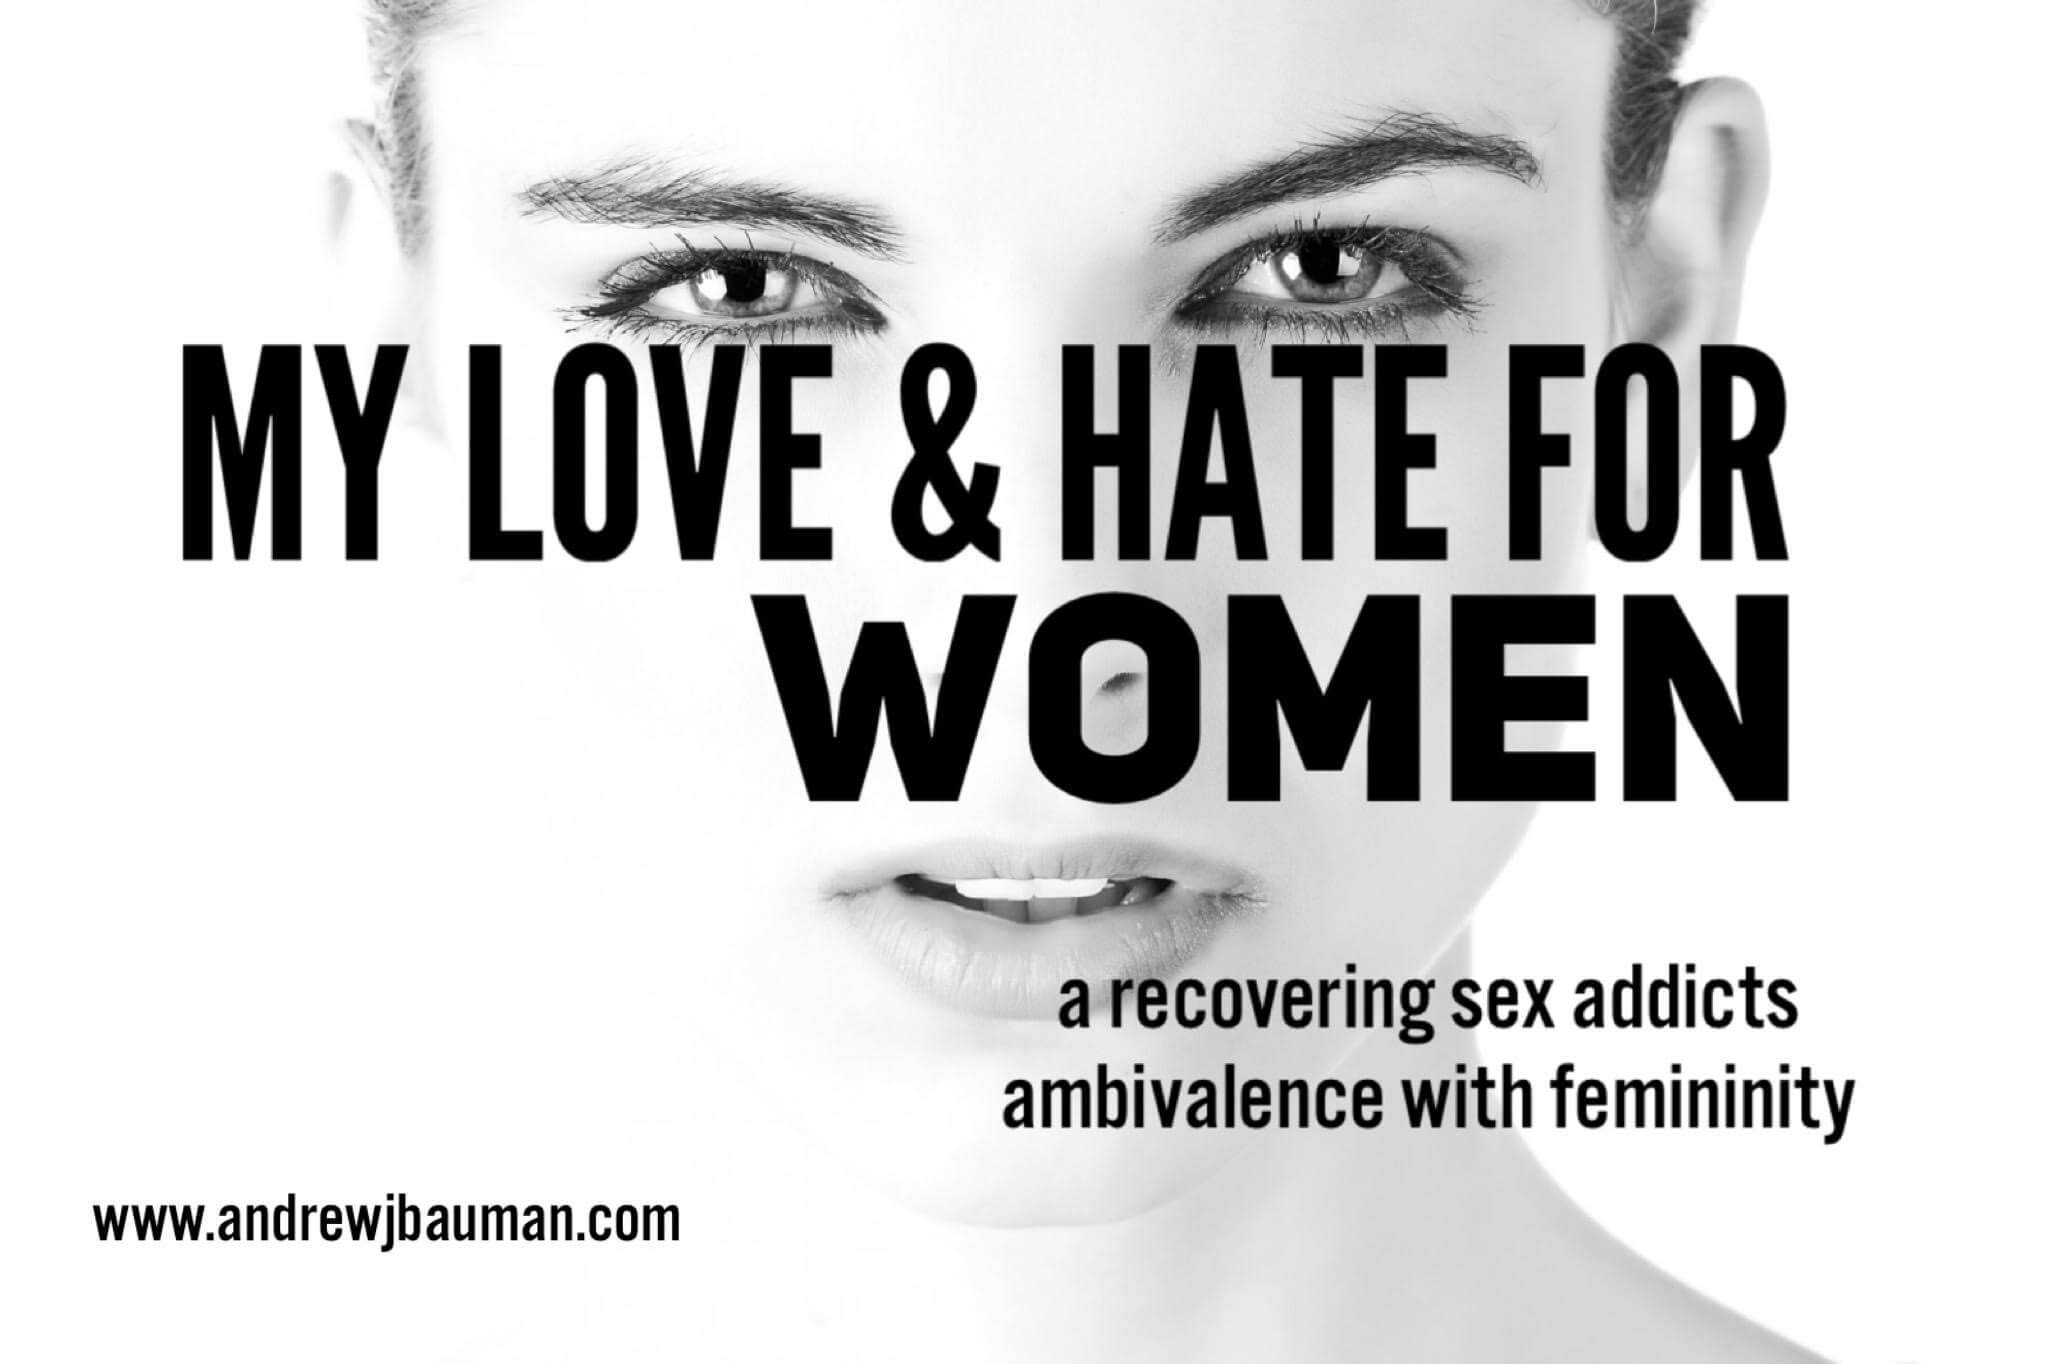 My Love and Hate for Women a recovering sex addicts ambivalence with femininity photo